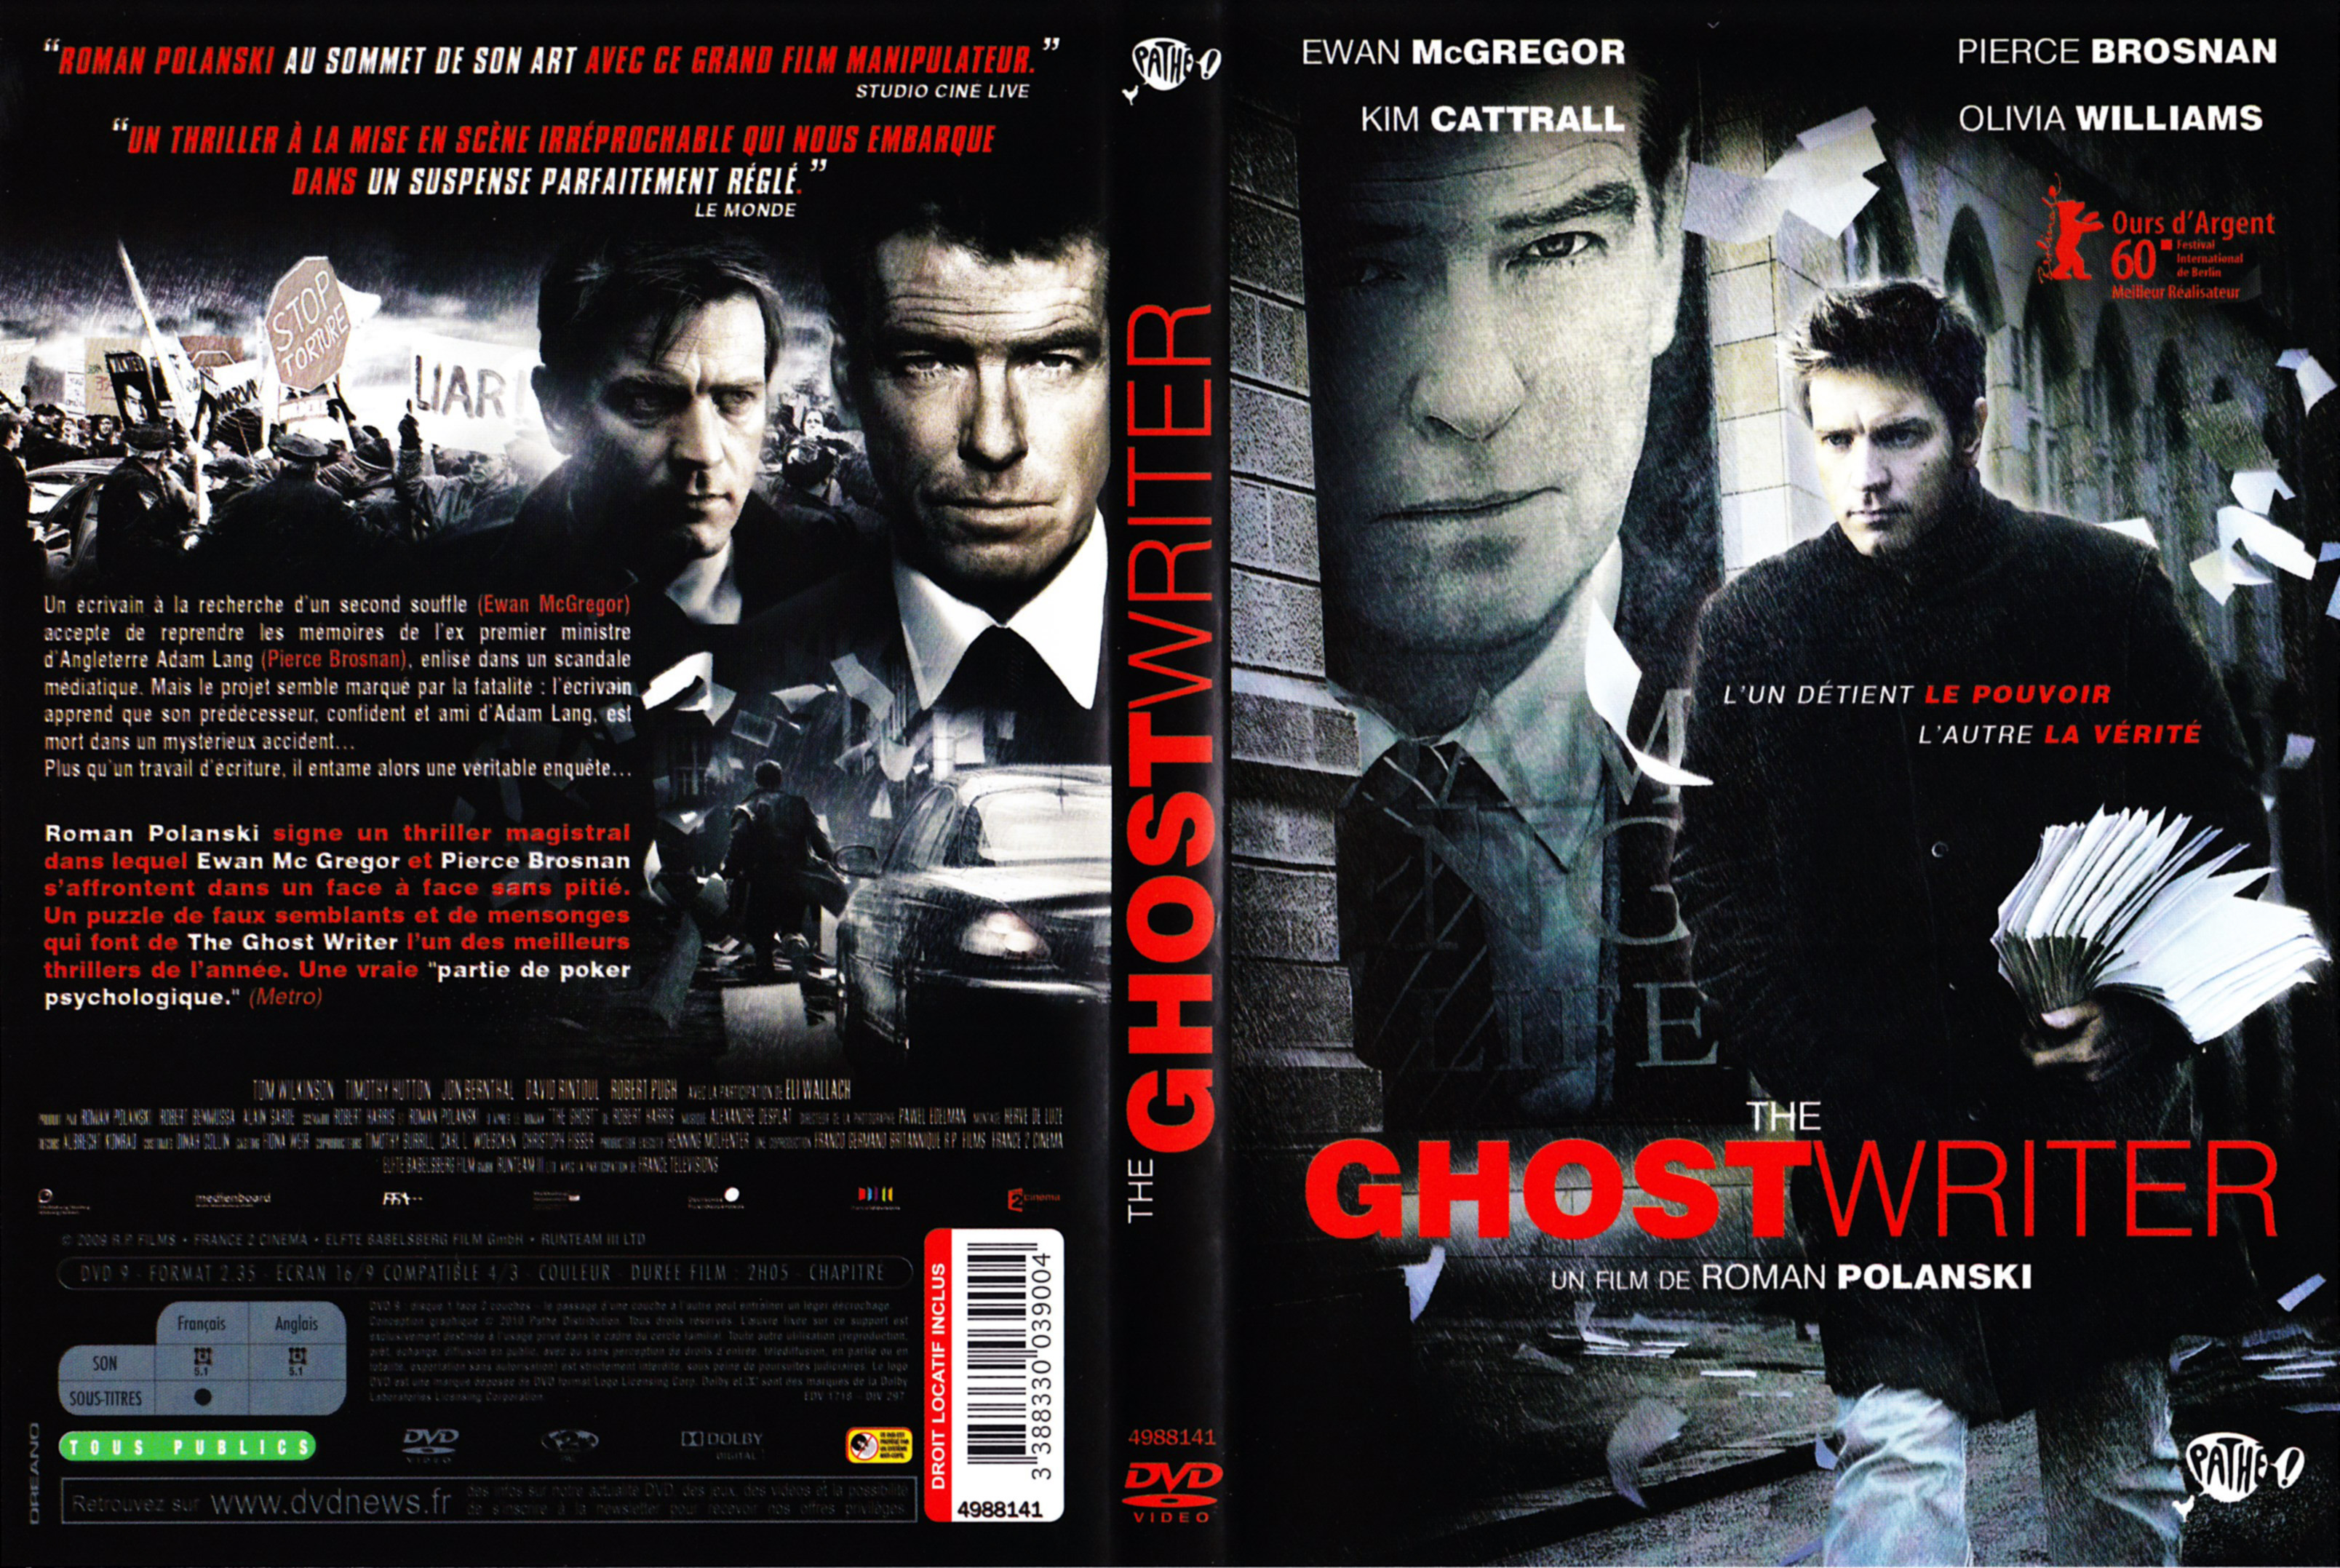 Jaquette DVD The ghost writer